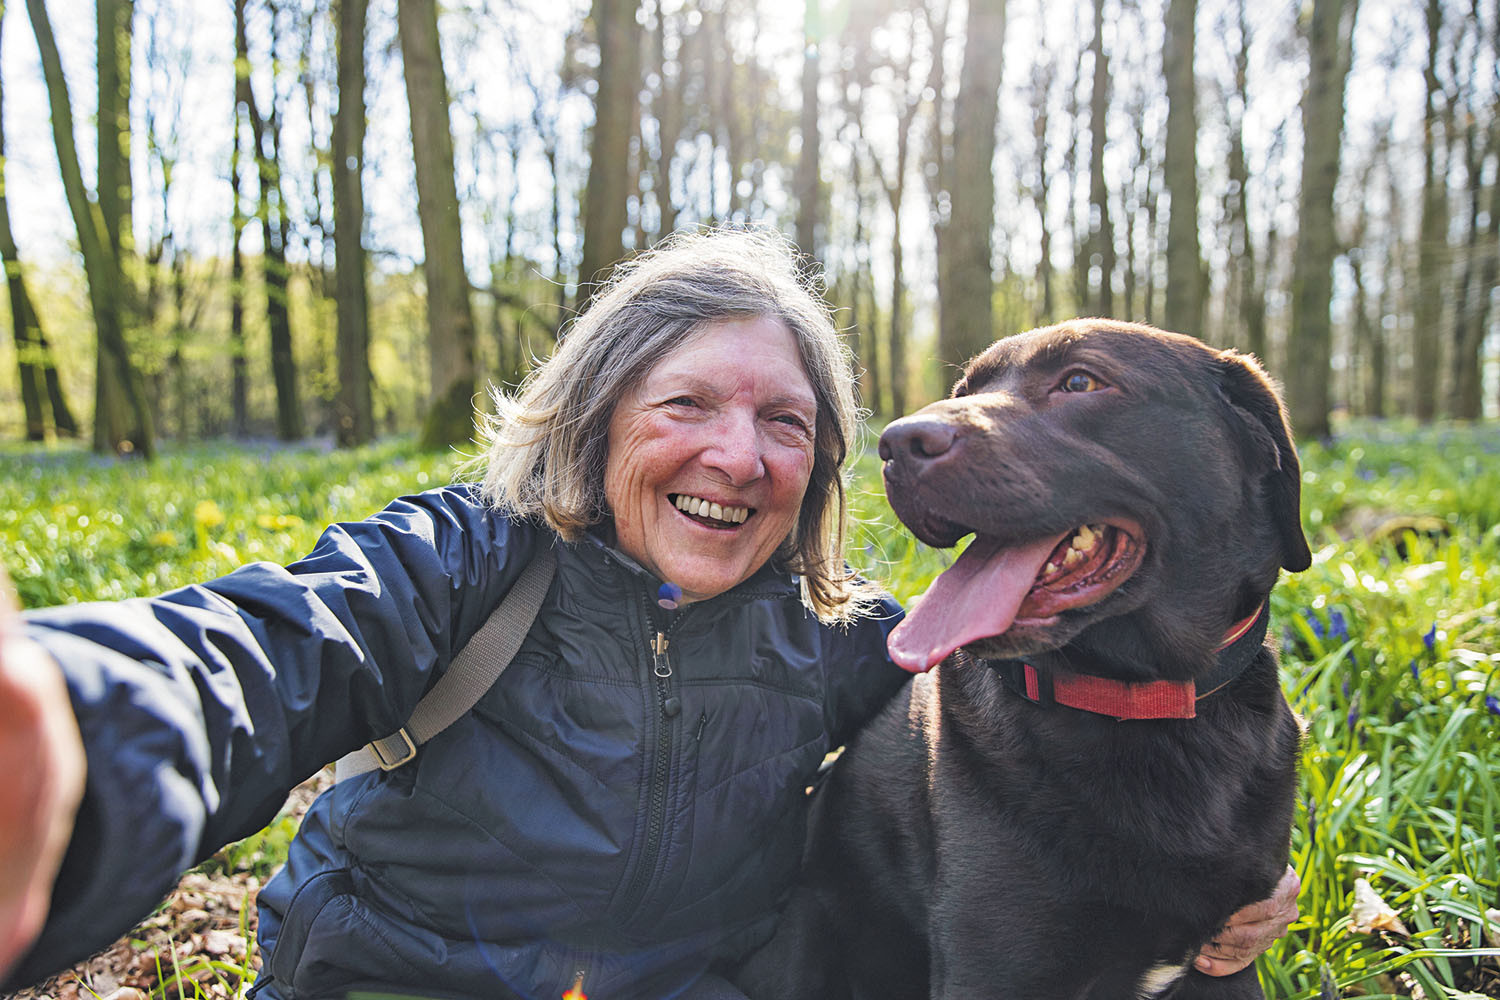 photo of a woman taking a selfie of herself and her dog, outdoors in a field